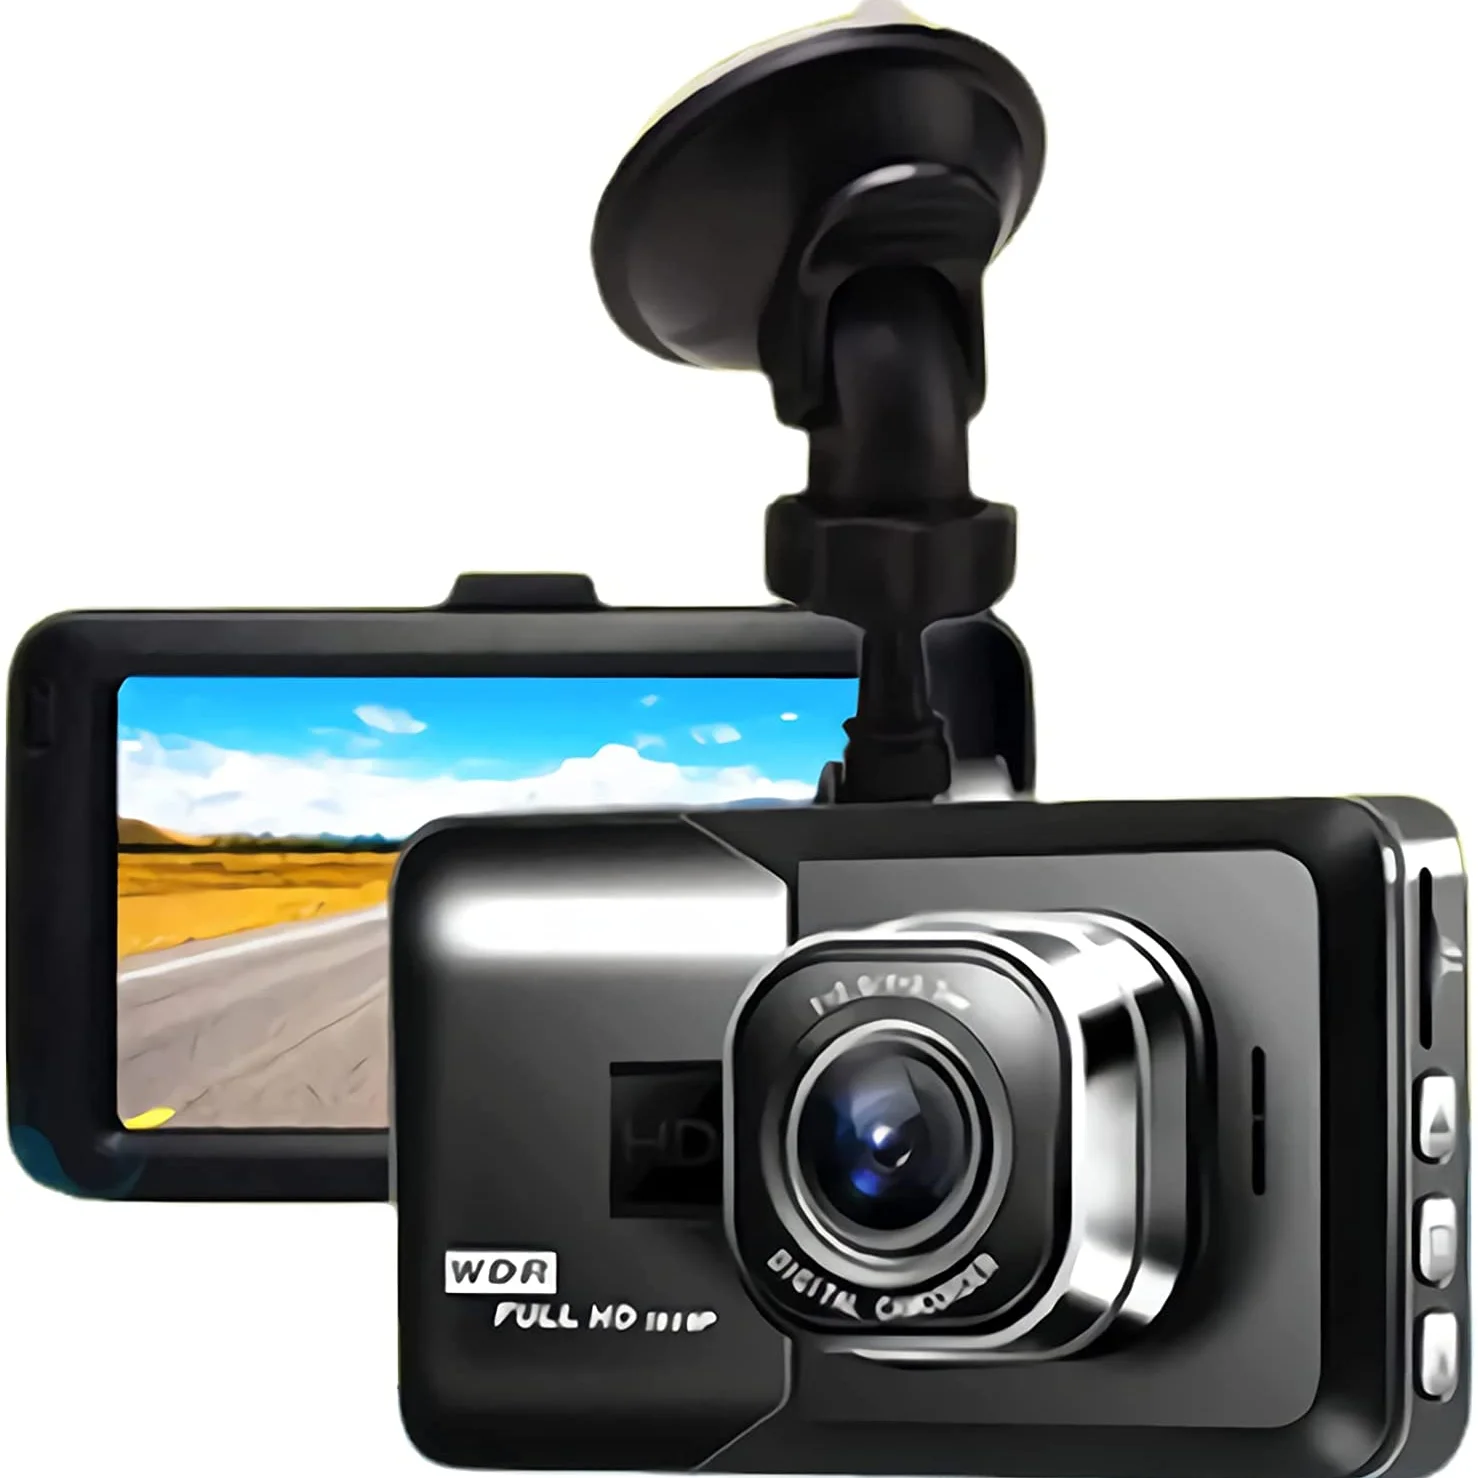 

Dash Cam 1080P FHD DVR Car Dash Cam 3 Inch LCD Screen 170° Wide Angle, Motion Detection, Parking Monitor